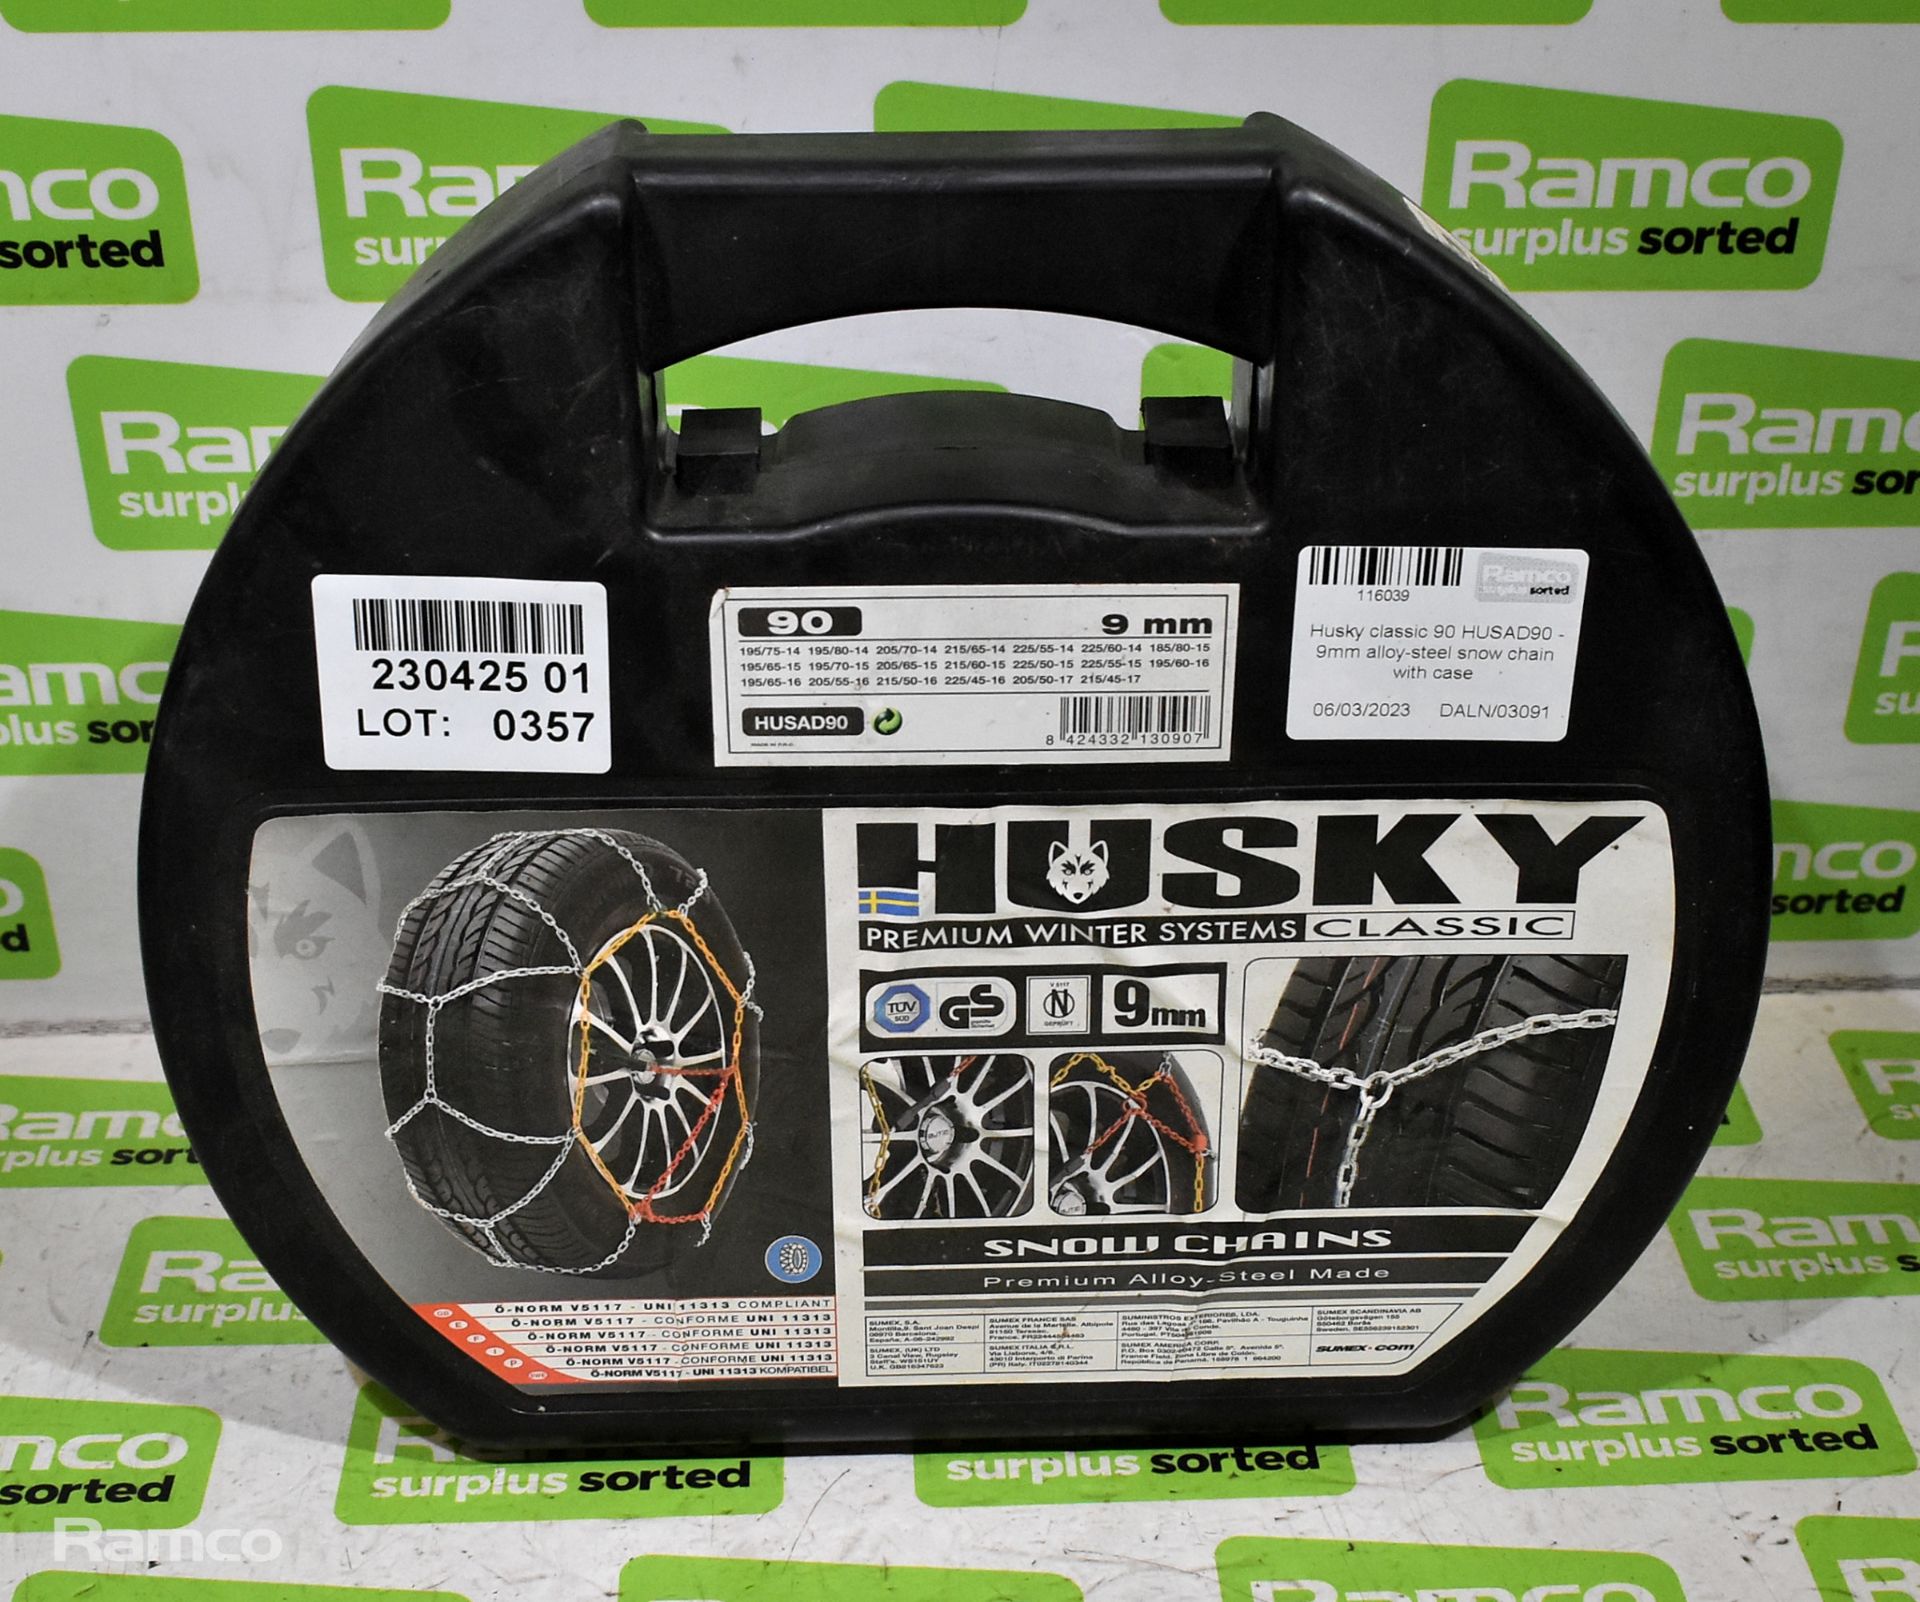 Husky classic 90 HUSAD90 - 9mm alloy-steel snow chain with case - Image 2 of 4